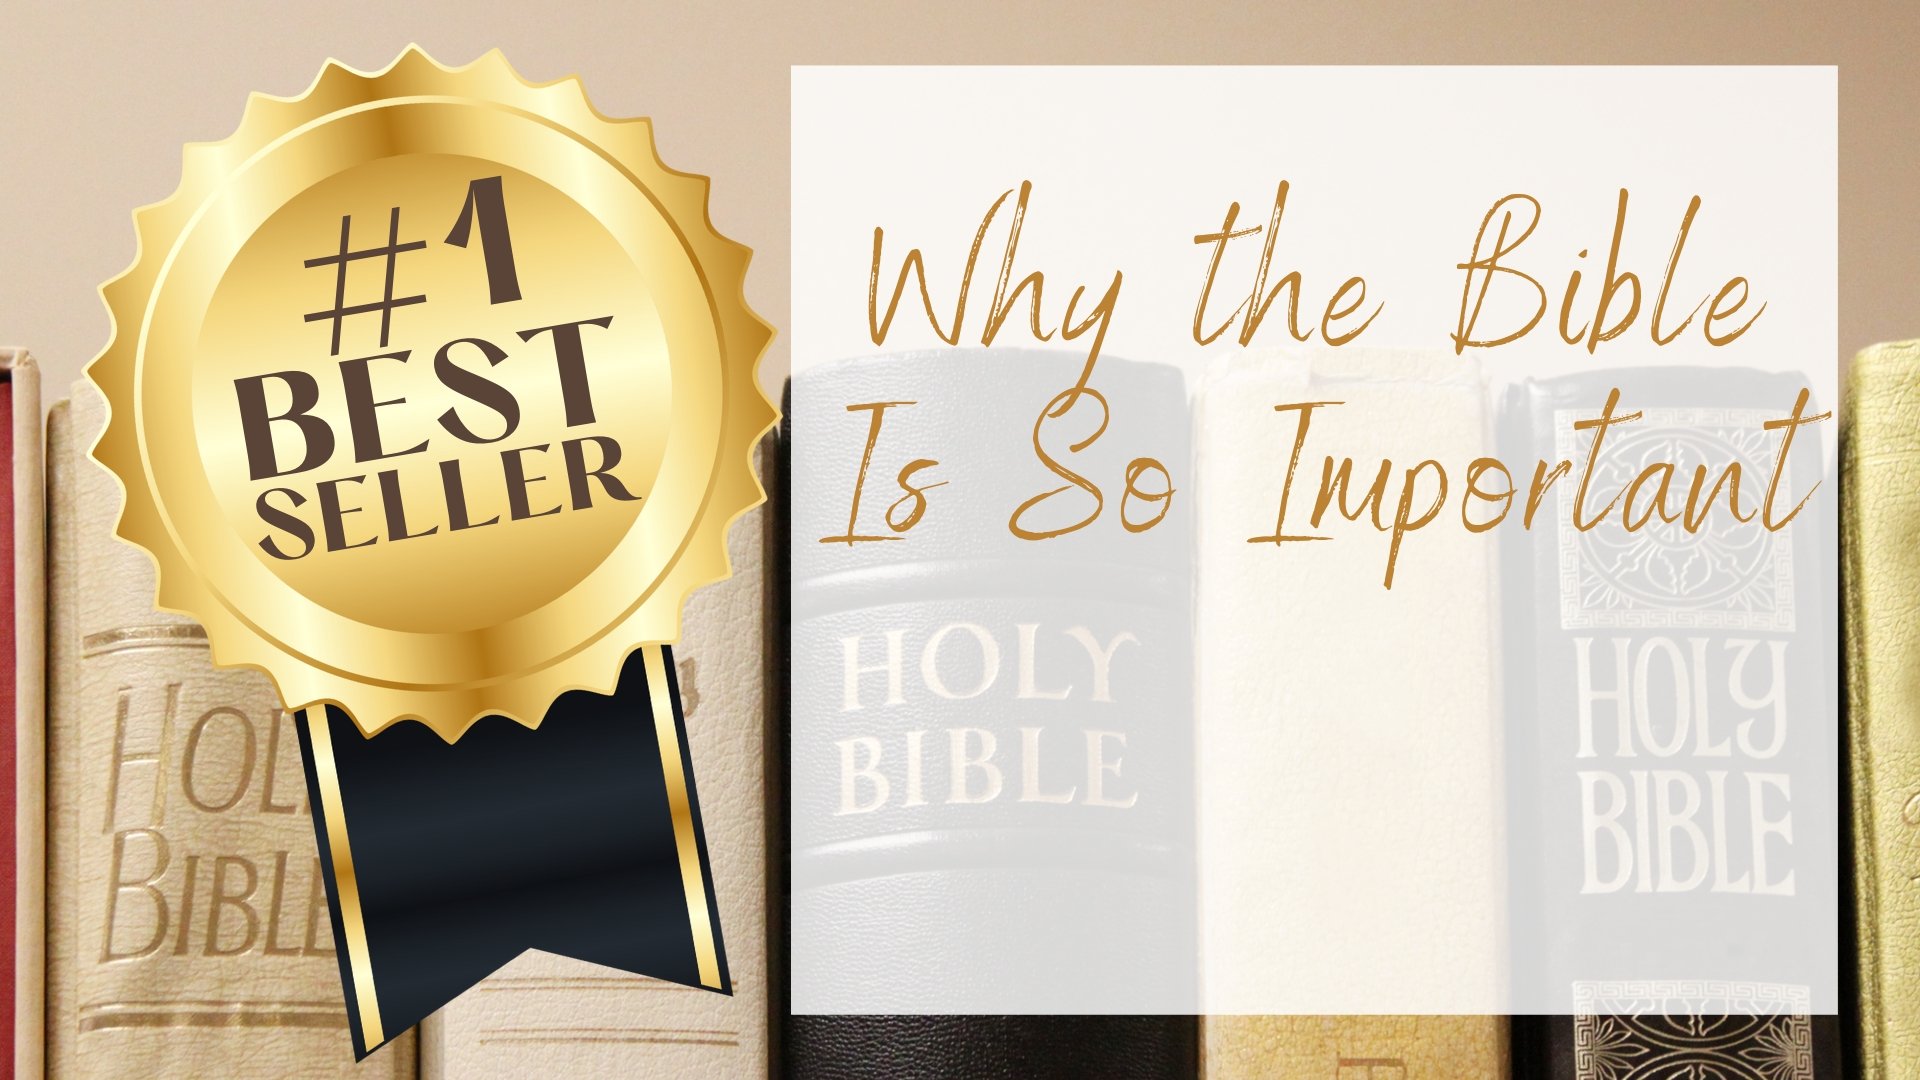 #1 Best Seller: Why the Bible Is So Important